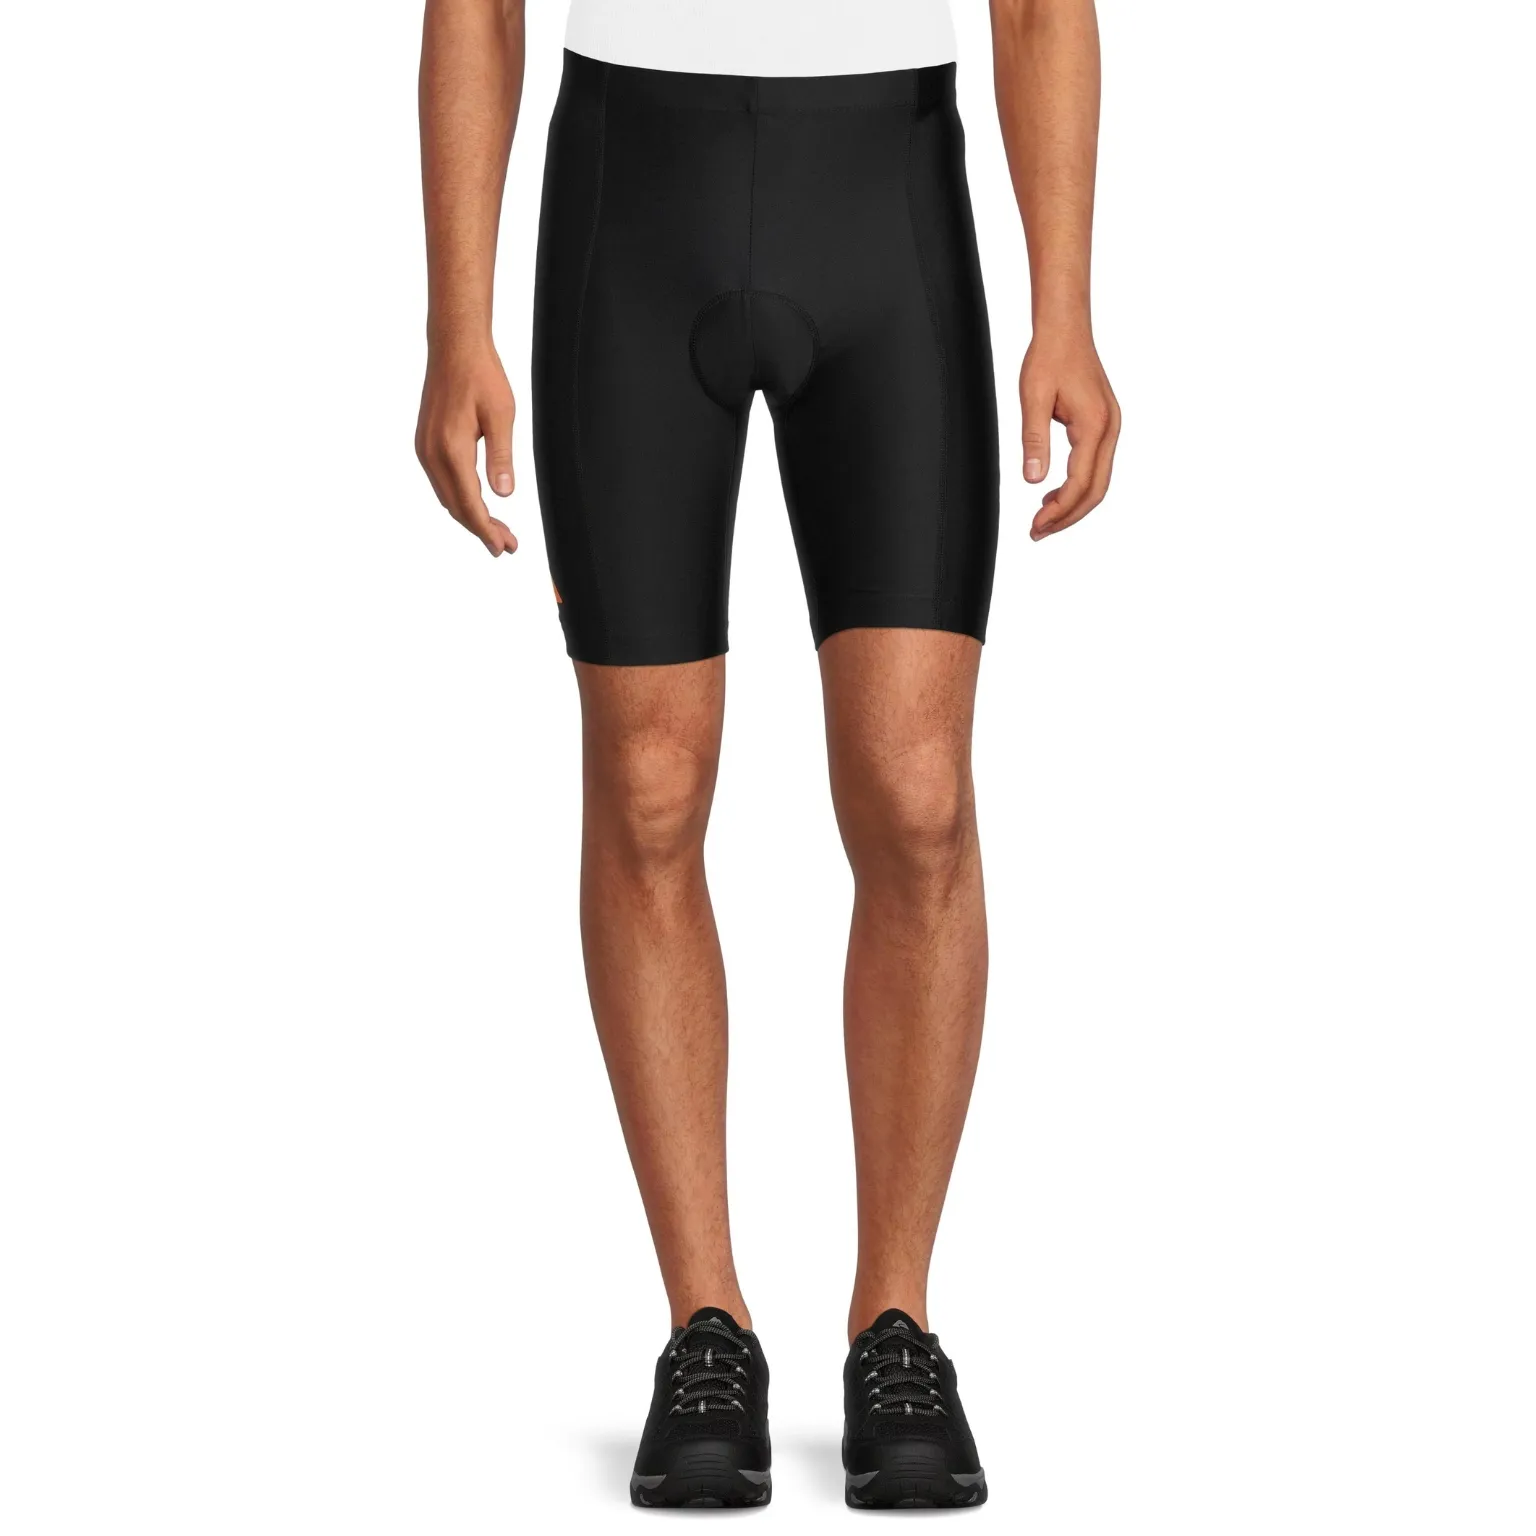 Cycling Shorts with trendy design